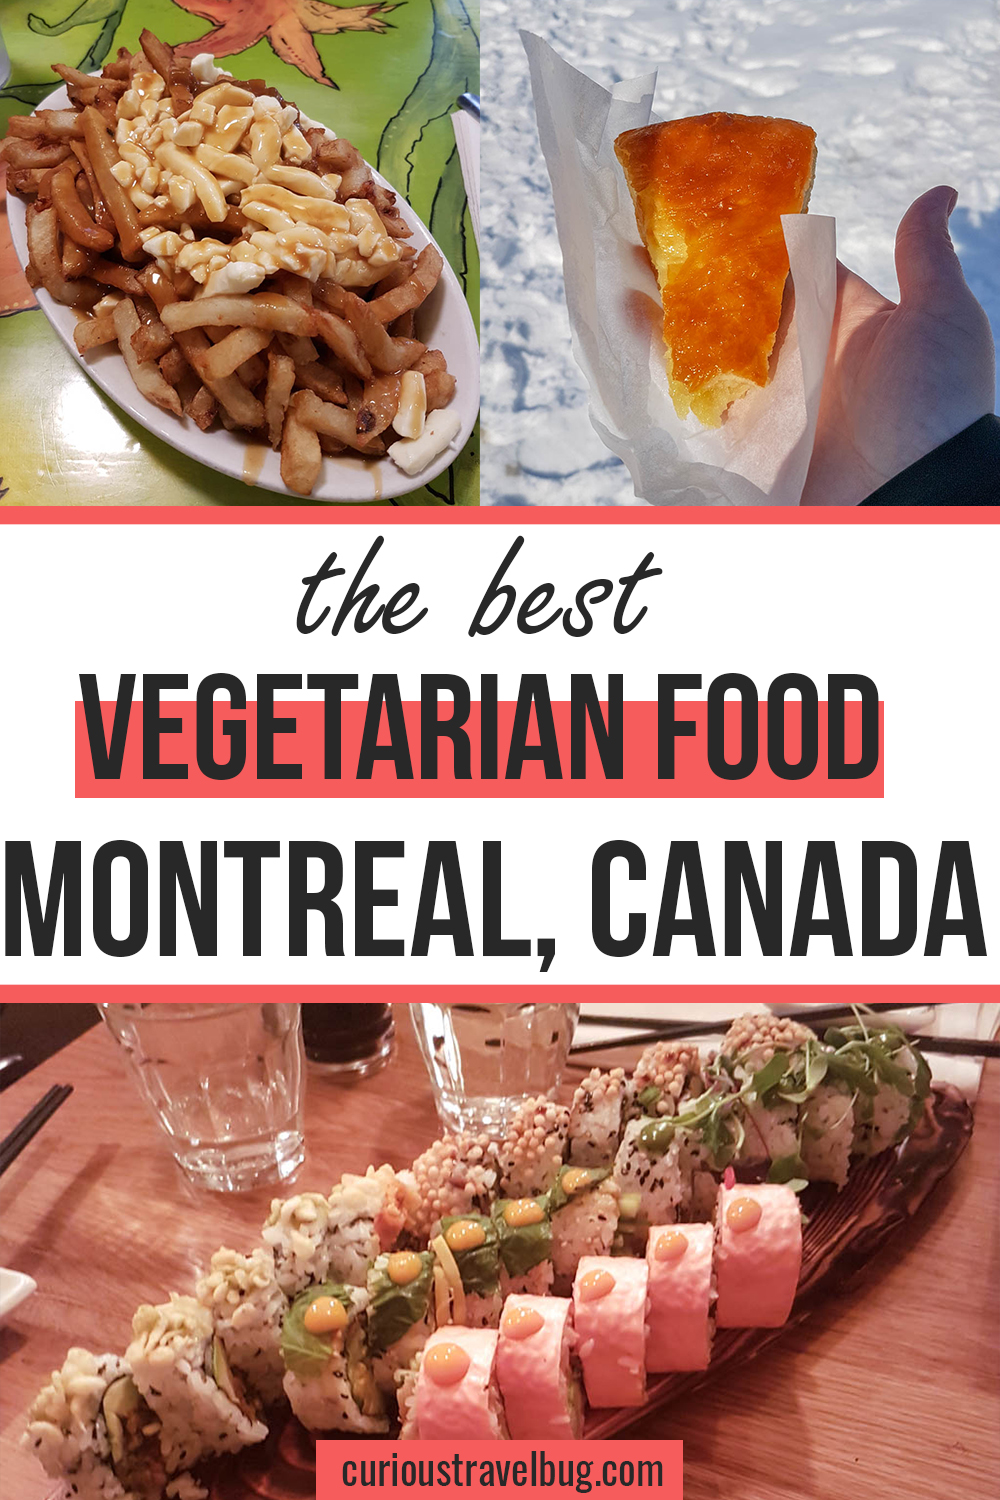 If you're looking for the best vegan and vegetarian in Montreal, this guide has all the top places to eat at including dessert places for your trip to Montreal.